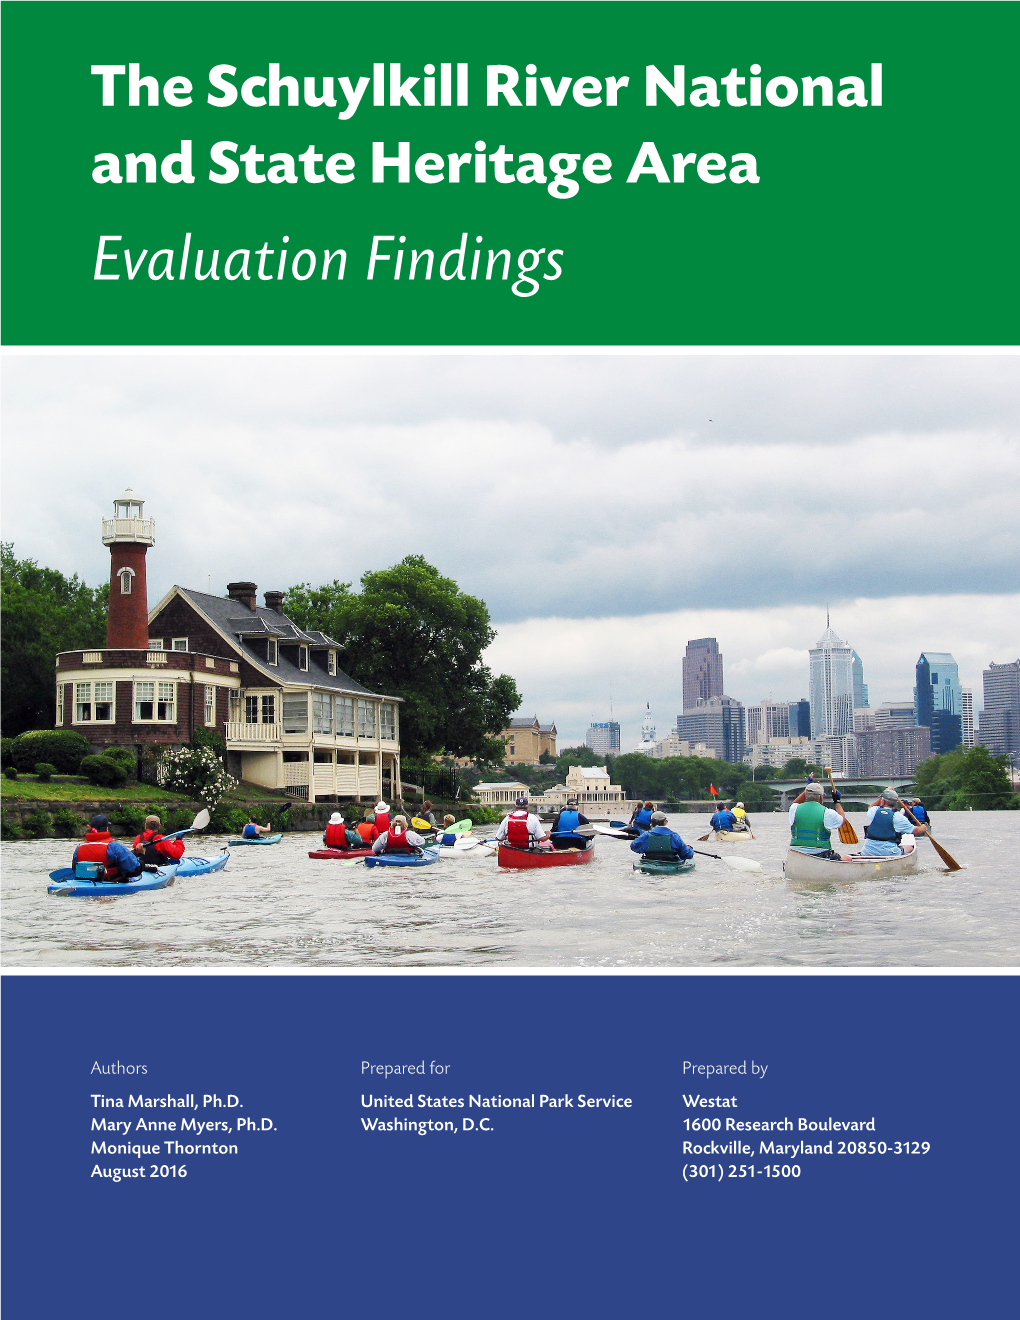 Schuylkill River National Heritage Area Evaluation Findings